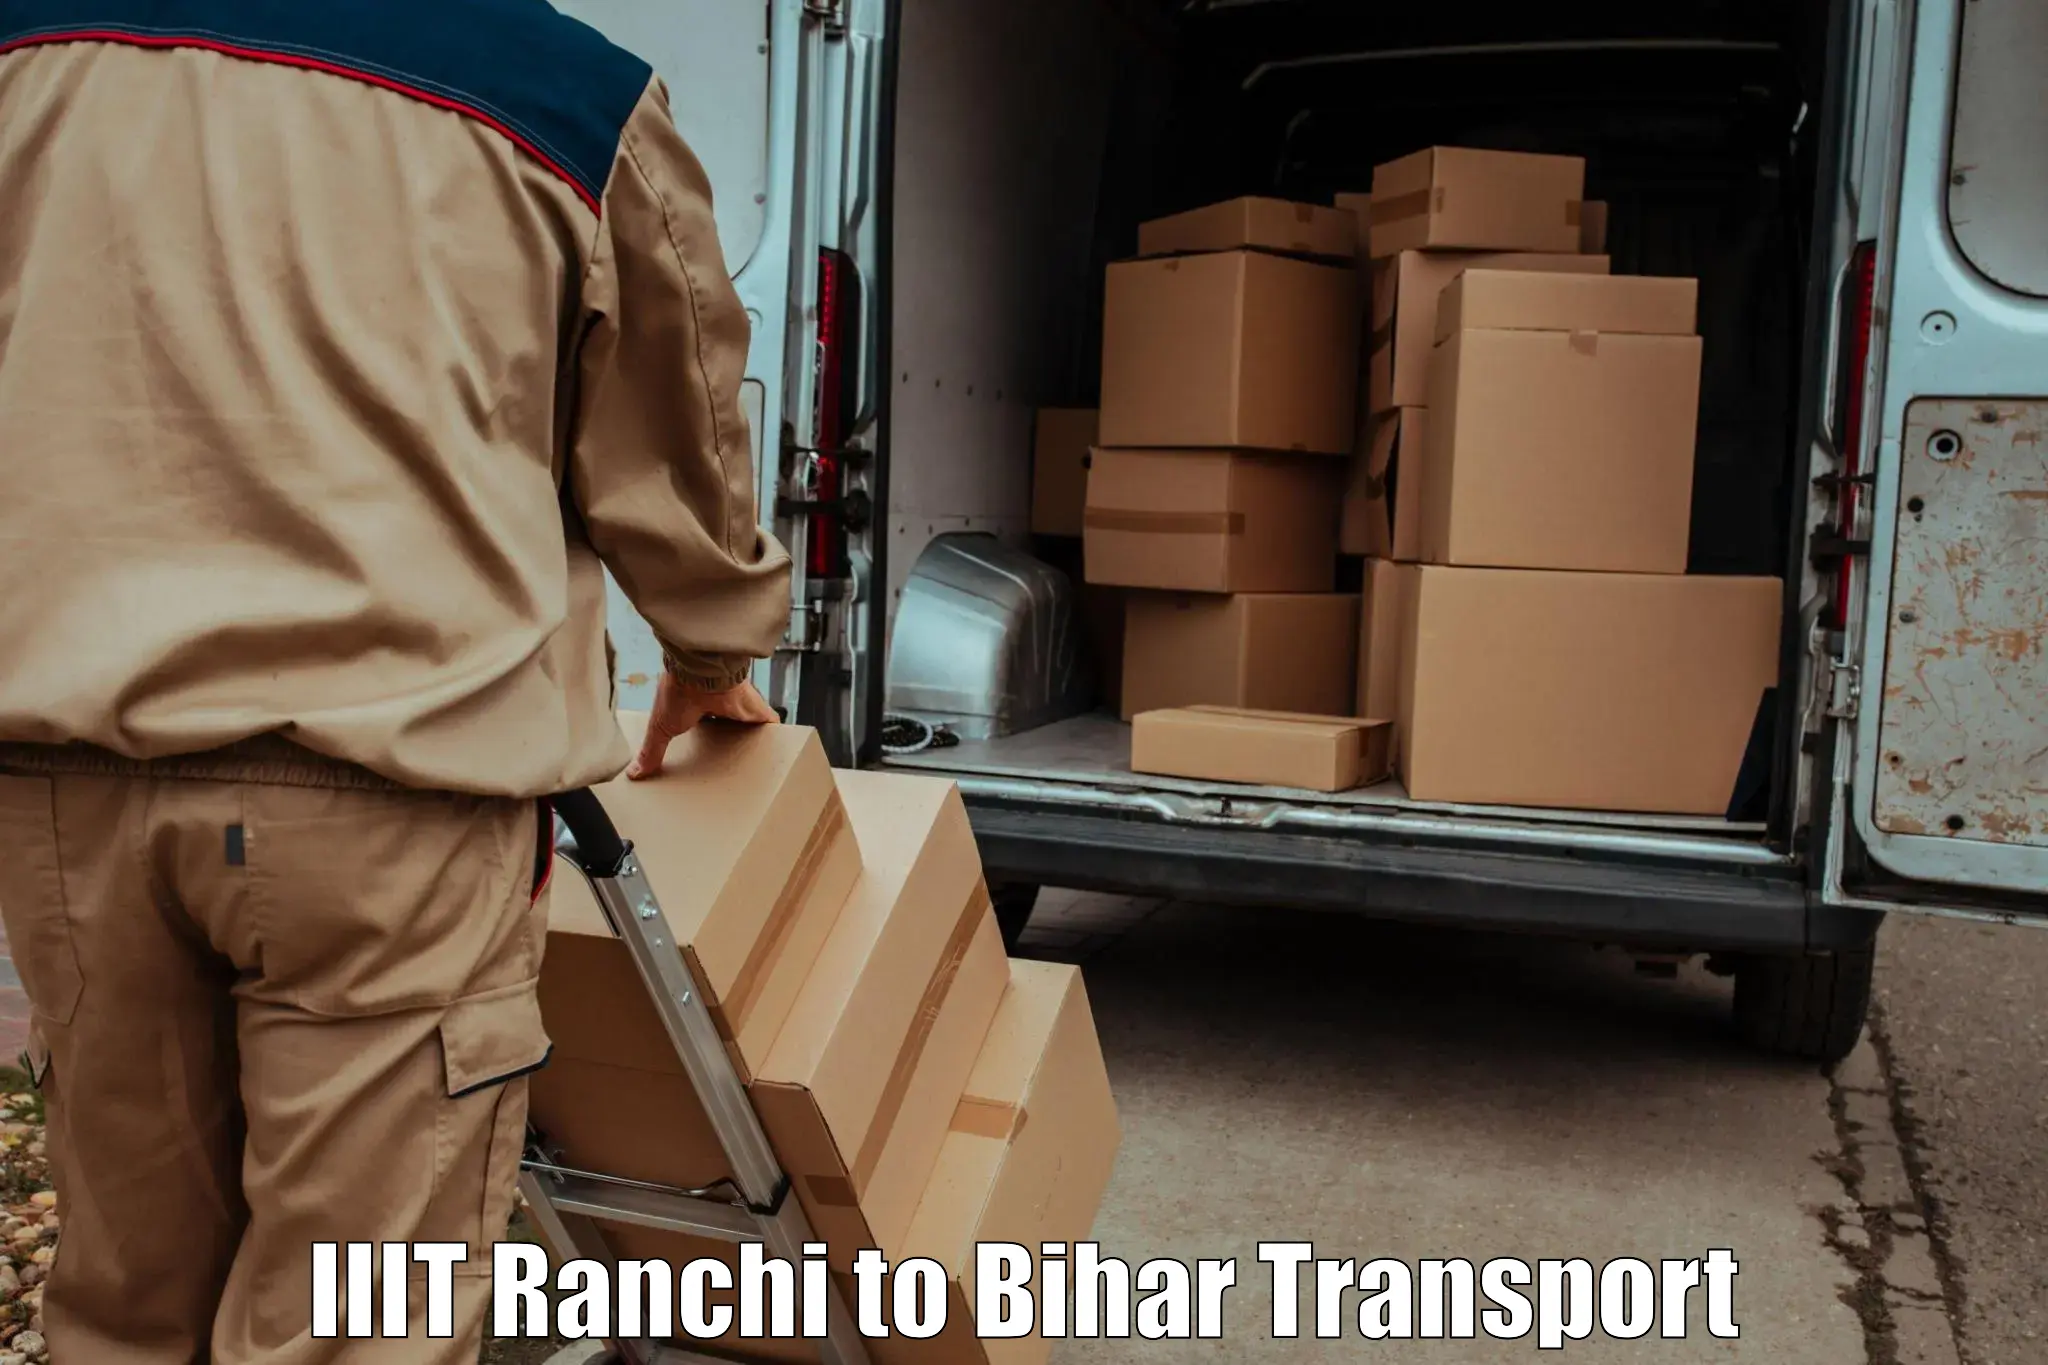 Online transport service IIIT Ranchi to Punsia